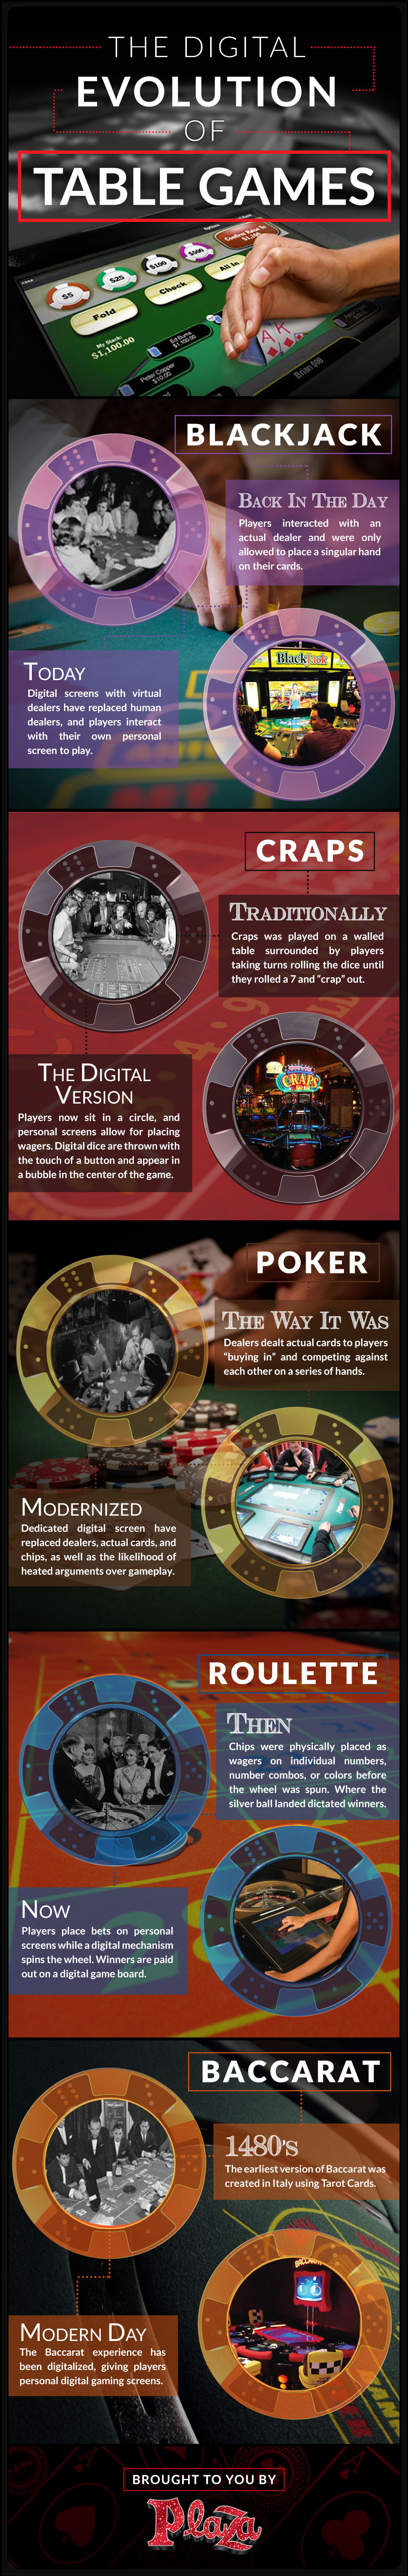 the evolution of digital gaming infographic